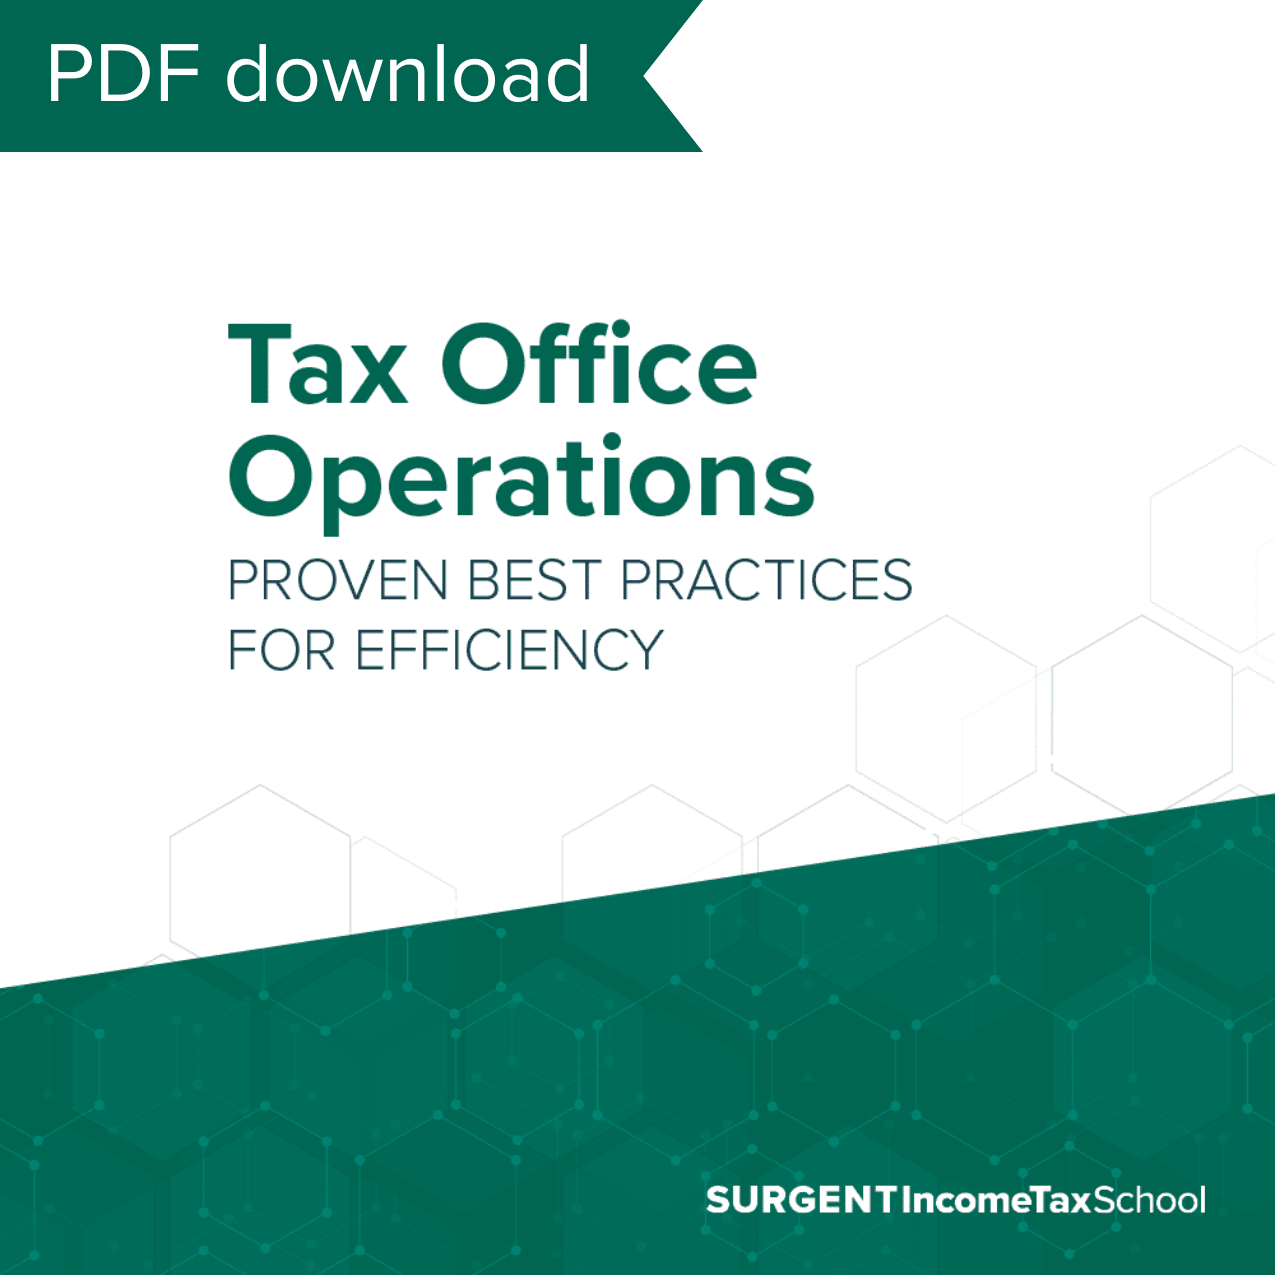 Tax Office Operations Manual - PDF Download option